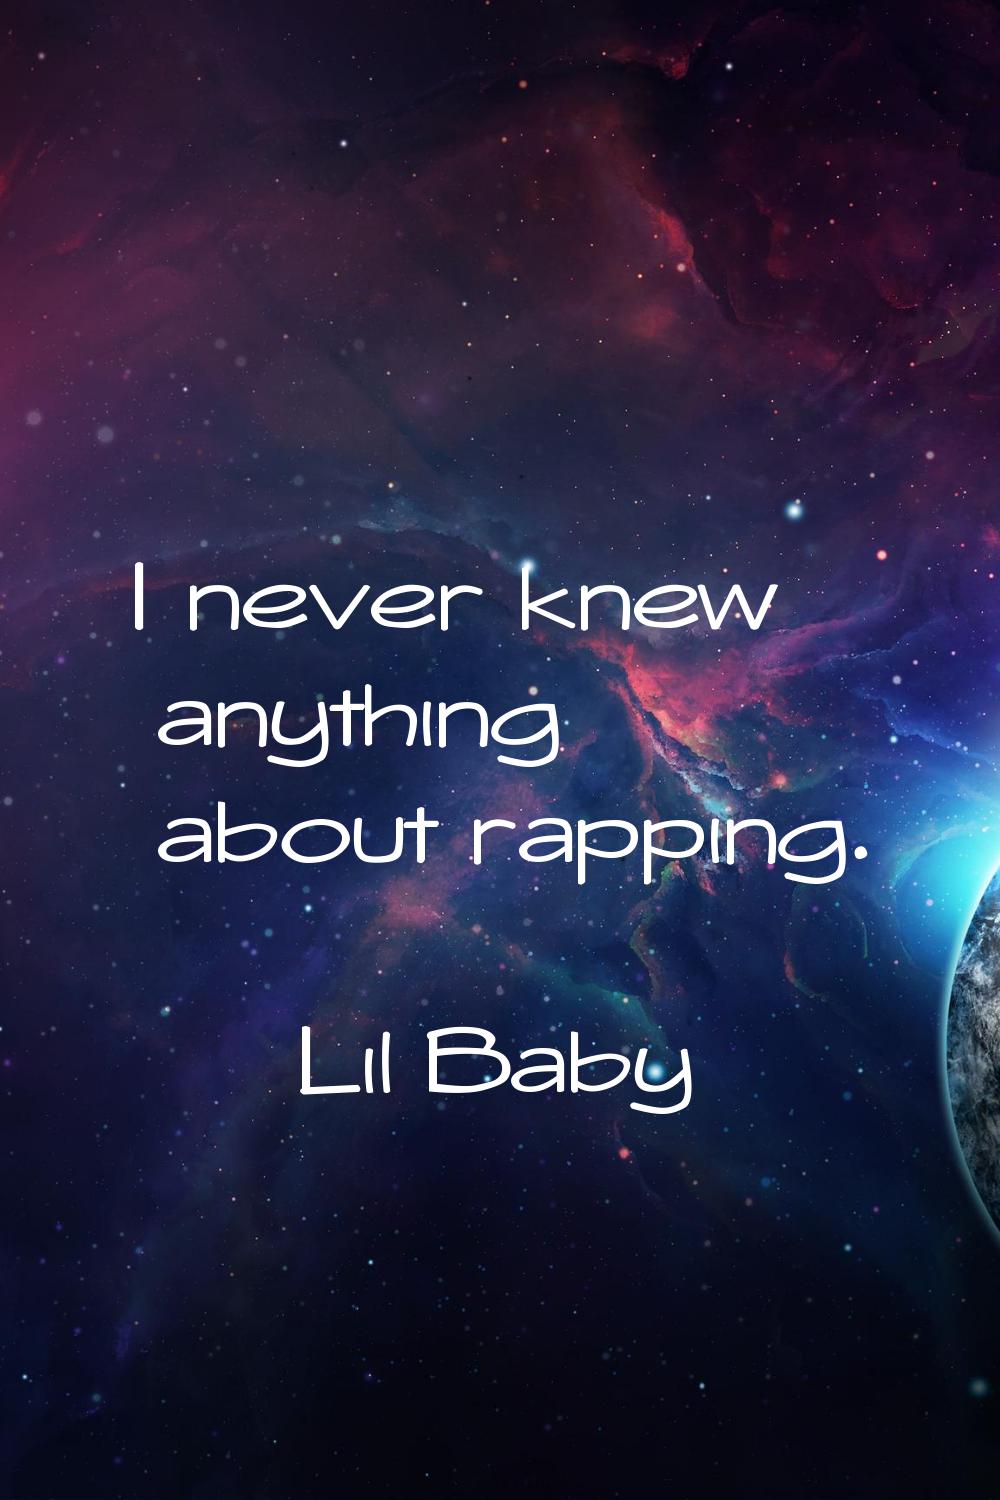 I never knew anything about rapping.